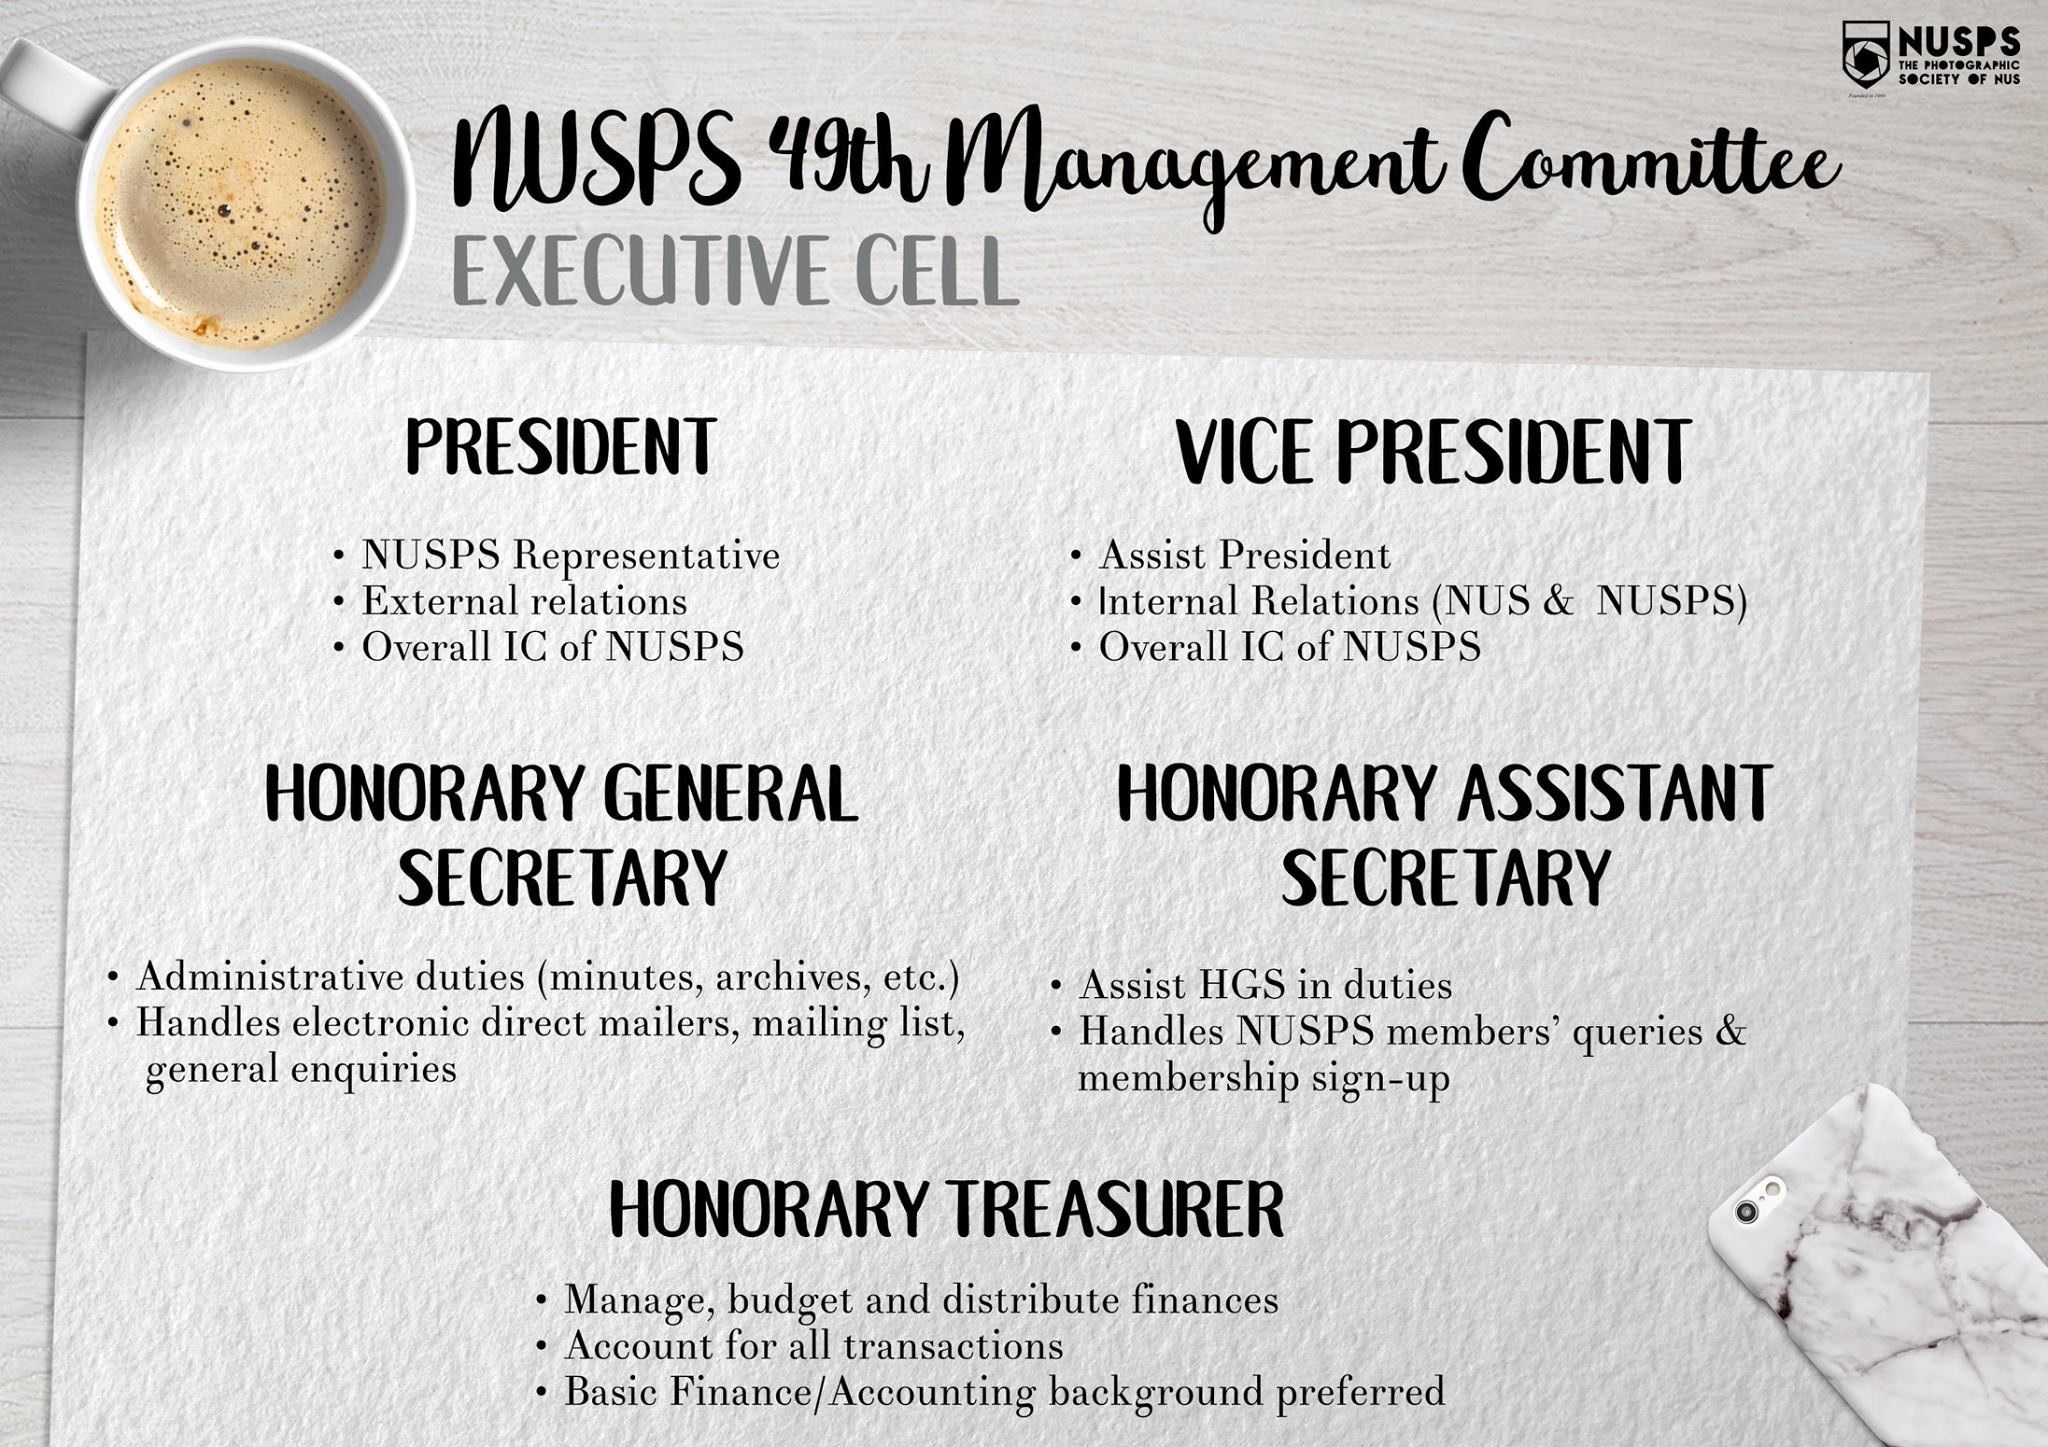 Recruitment for the 49th Management Committee!